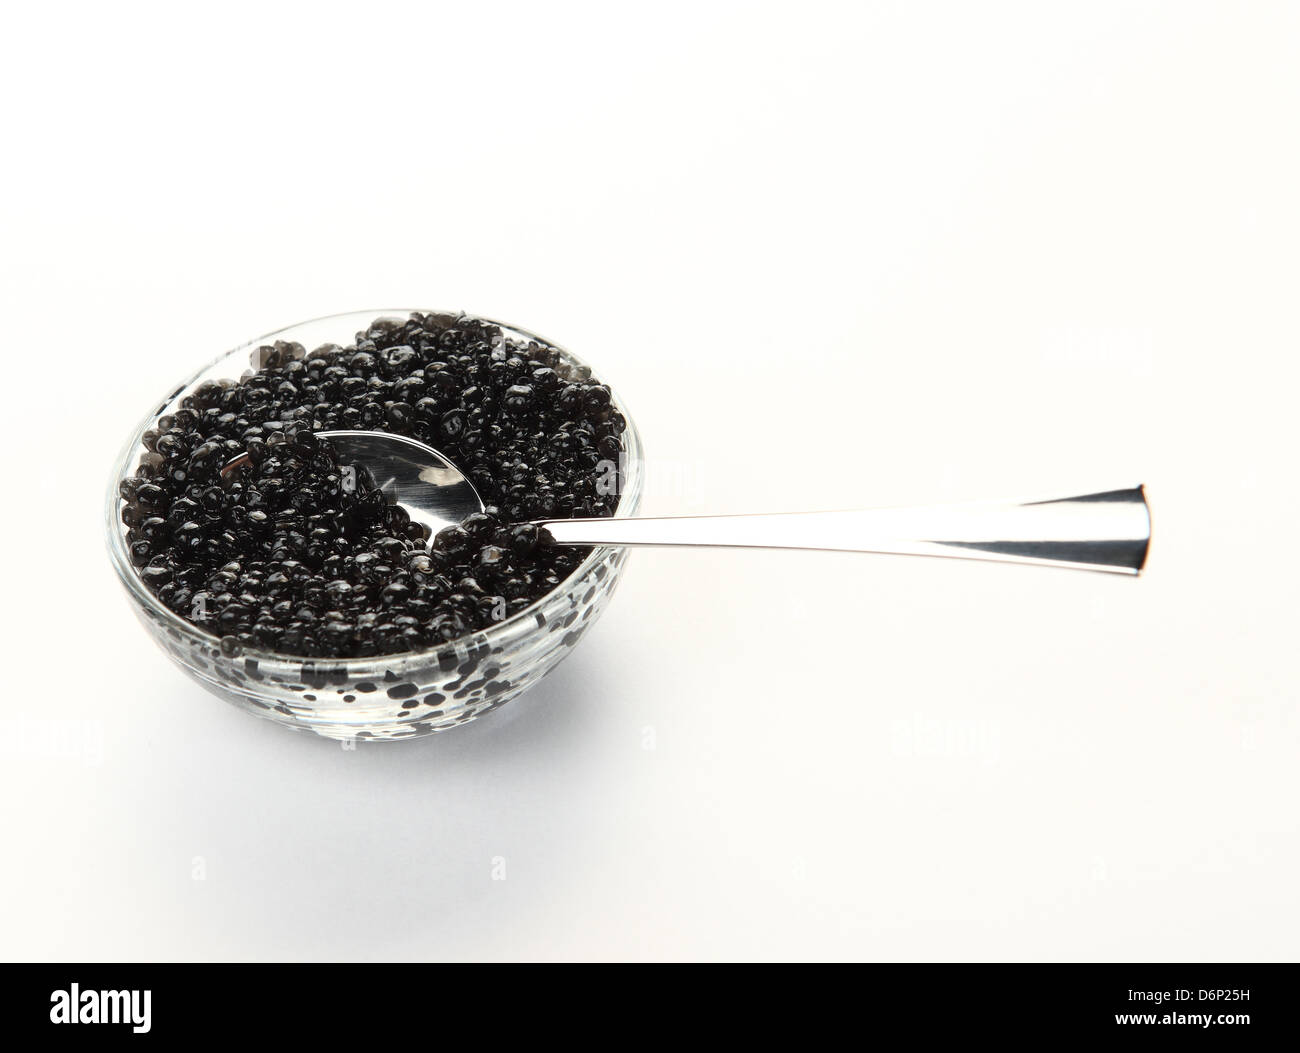 close-up of spoon and glass bowl with black caviar on the white background Stock Photo